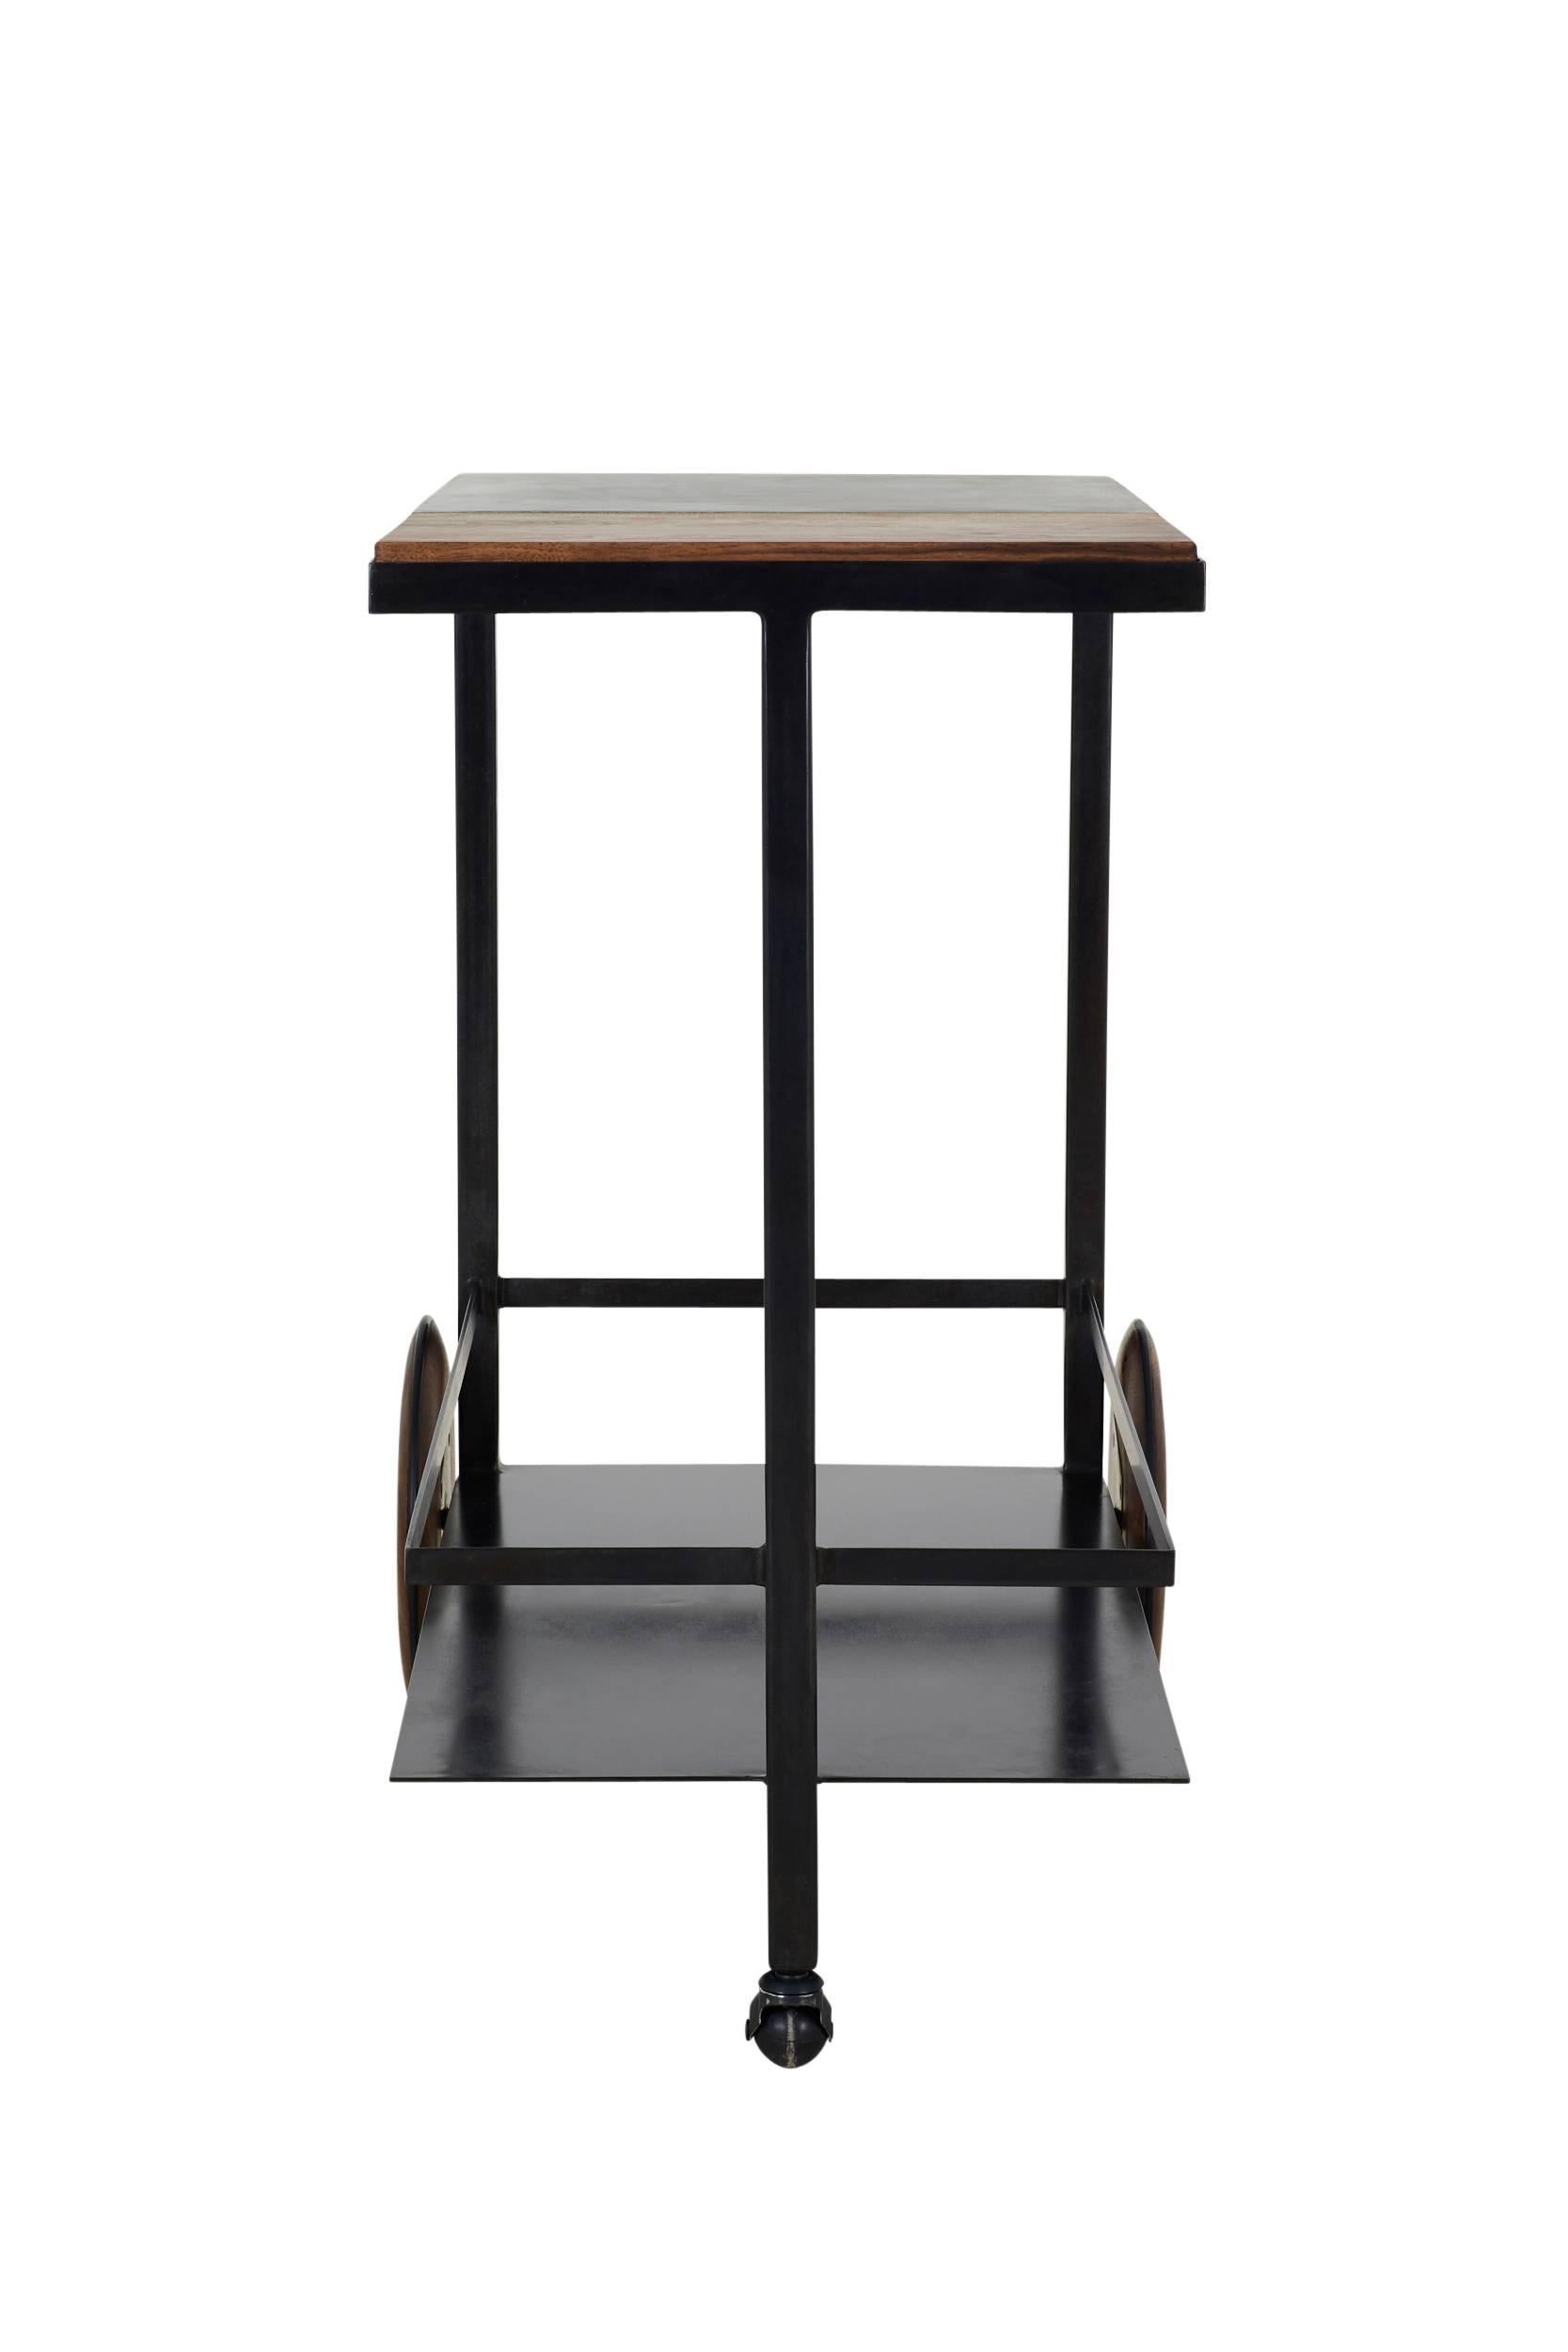 Blackened Steel, Cast-Concrete and Solid Walnut Wood Handsome Bar Cart For Sale 5